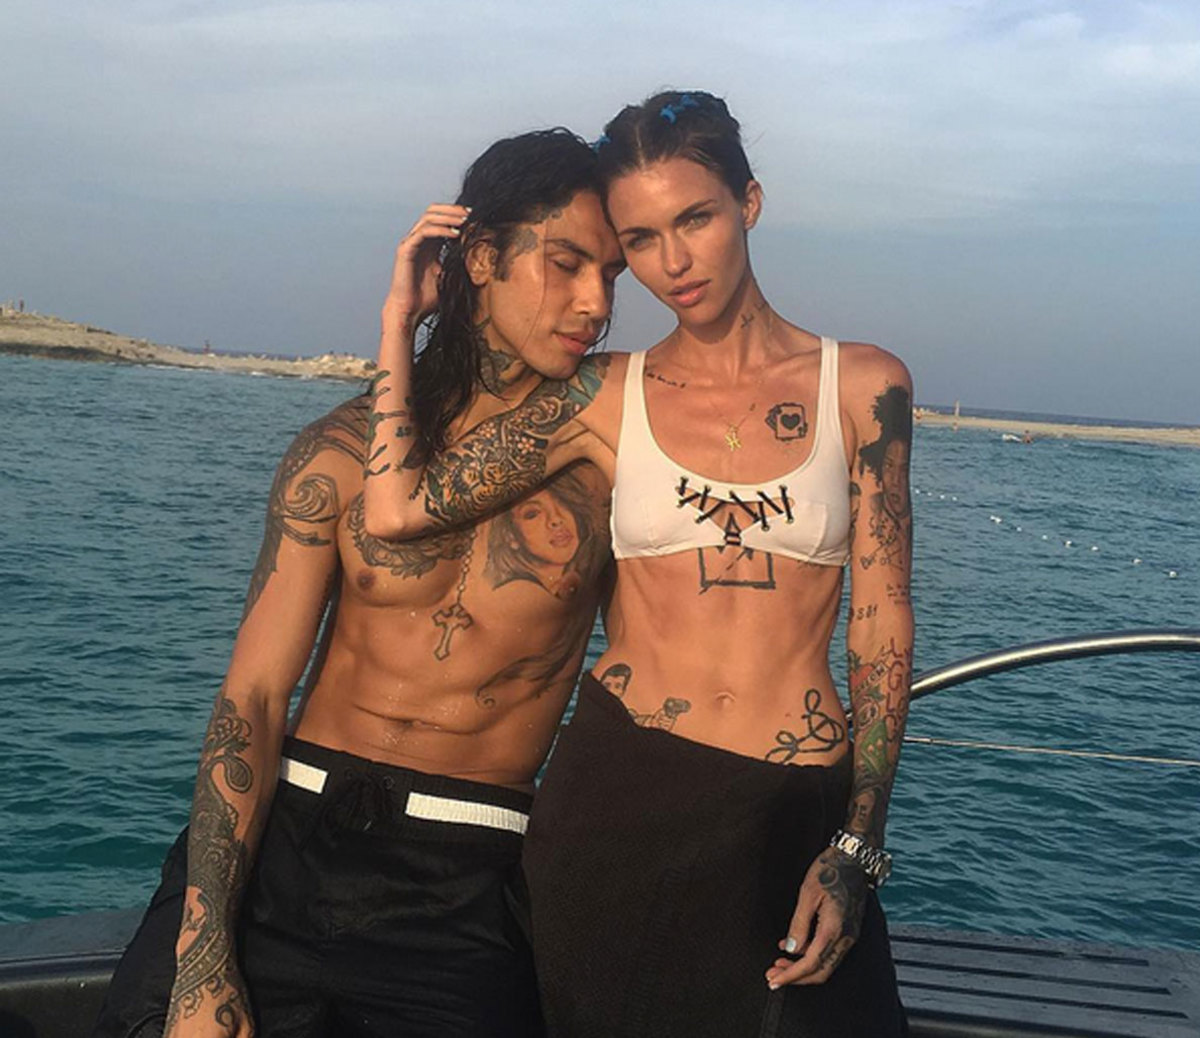 The Hottest Photos of Actress Ruby Rose - Men's Journal